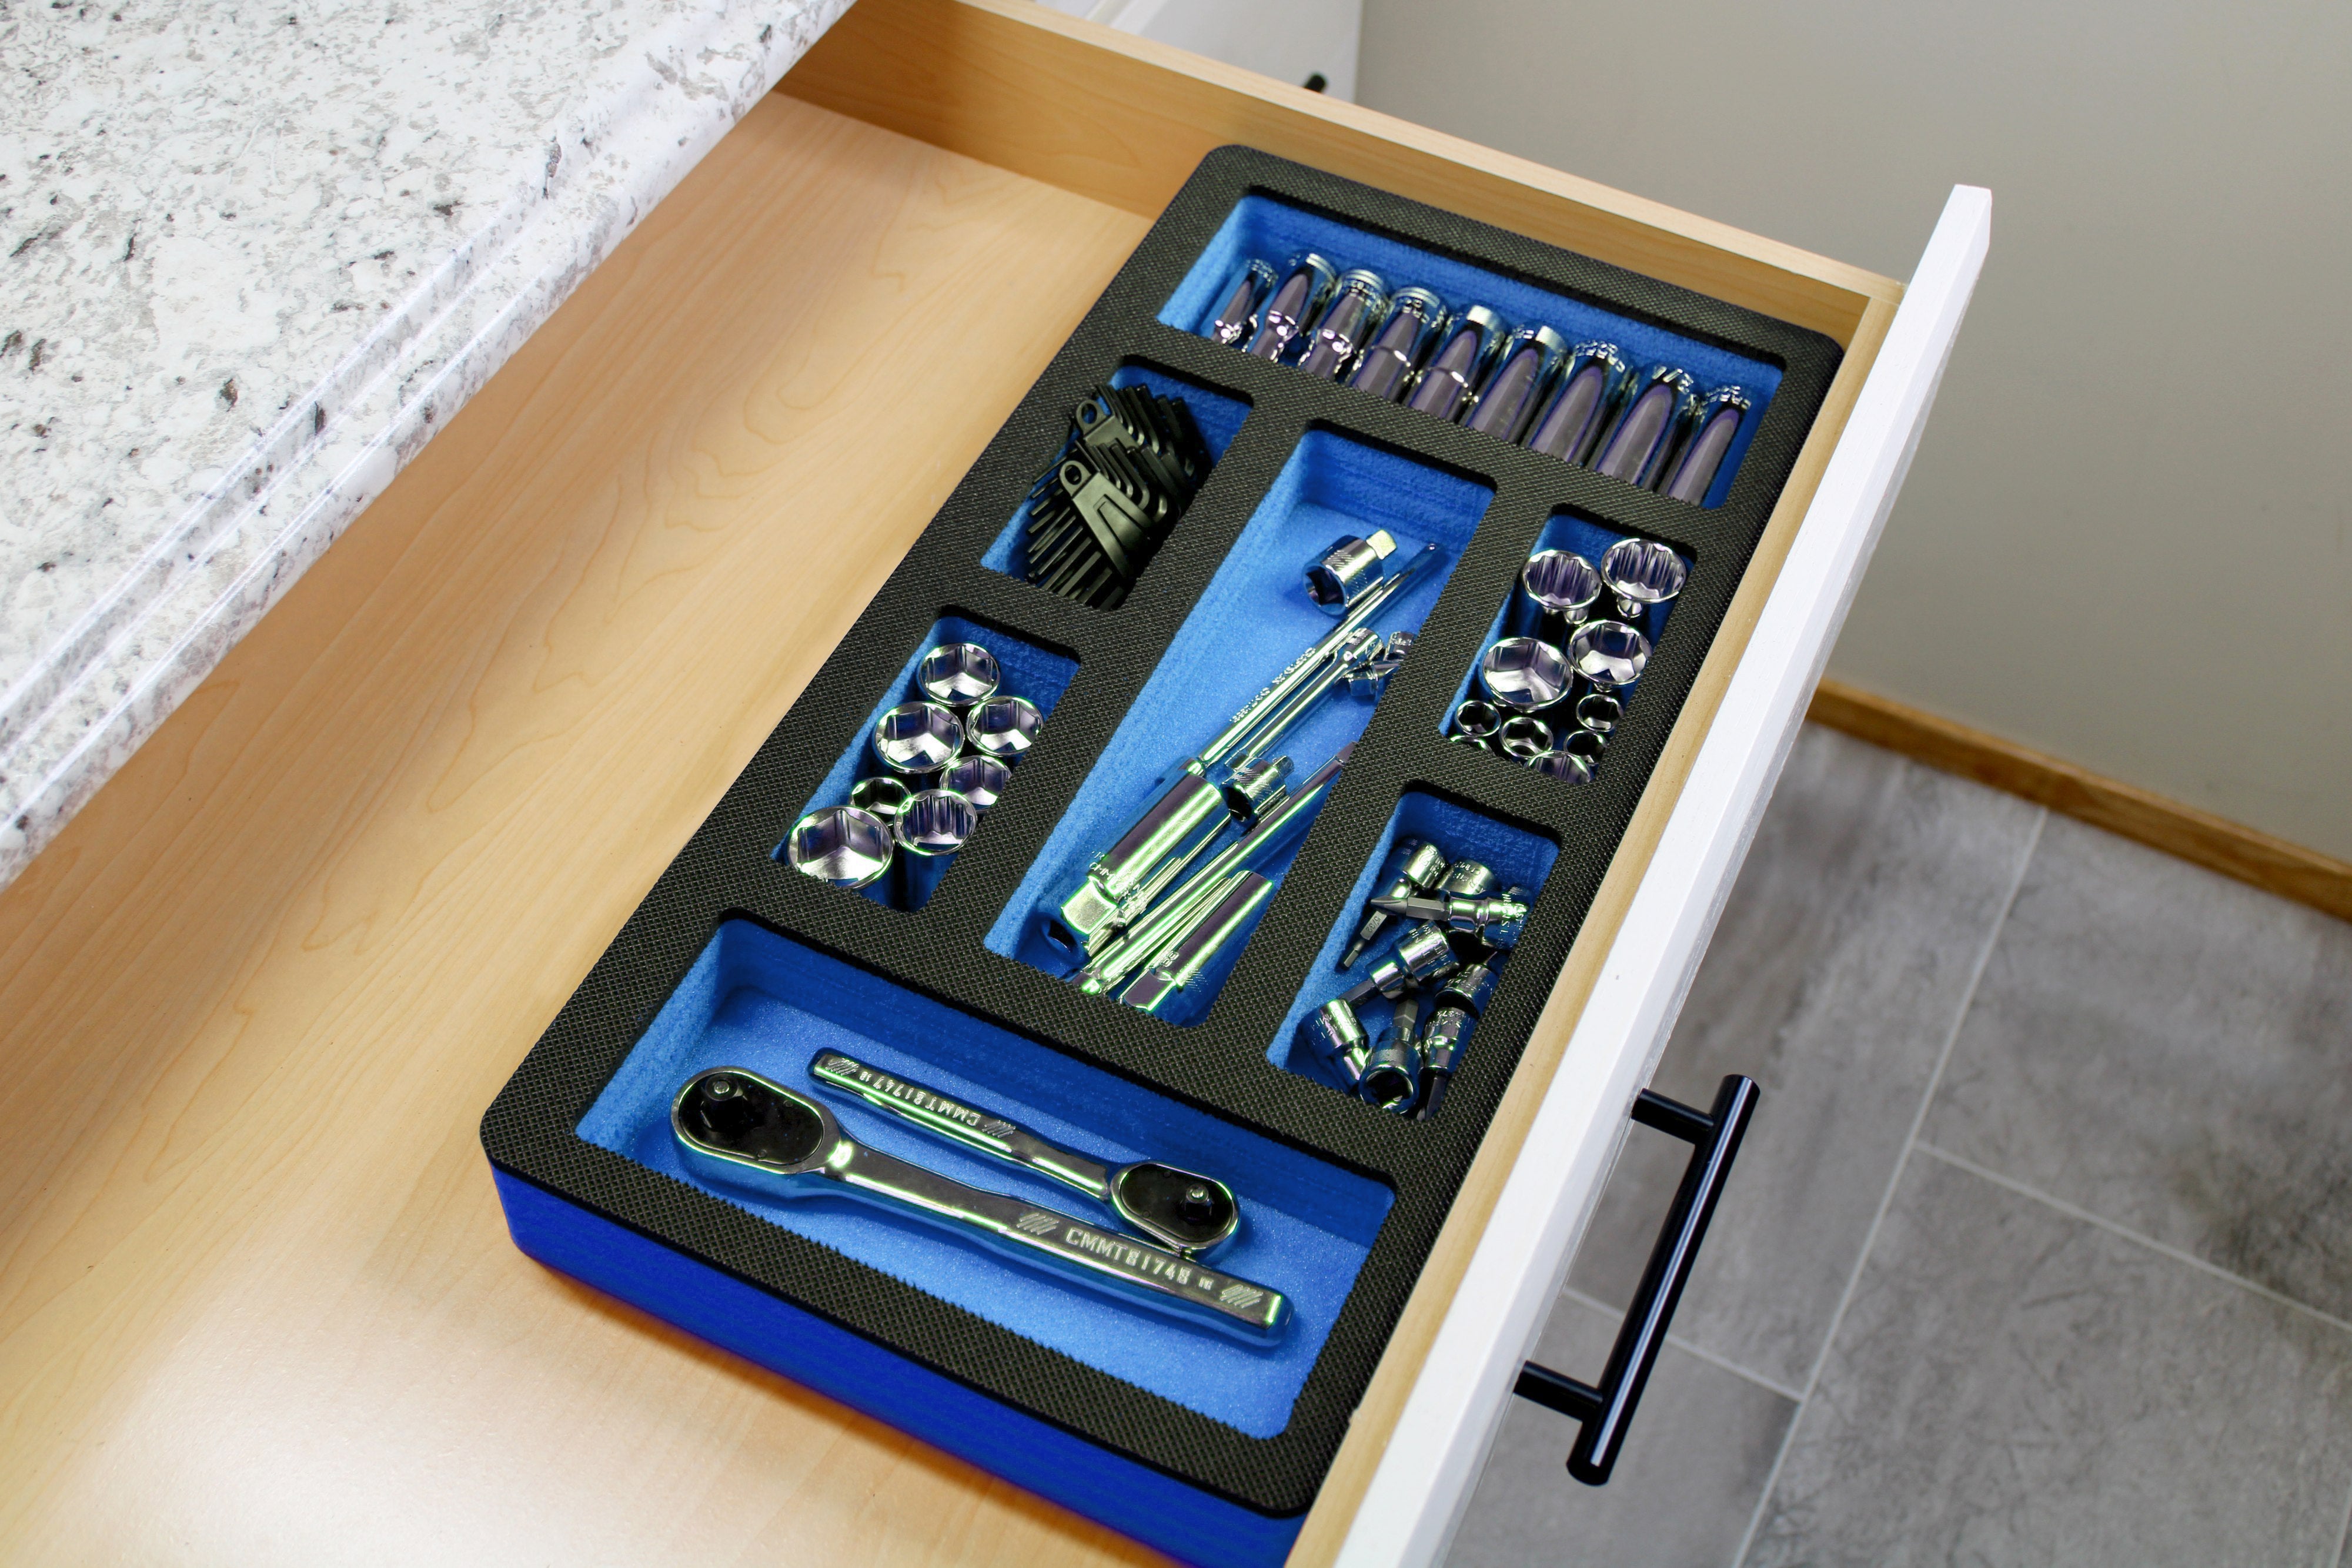 Tool Drawer Organizer Insert Blue and Black Durable Foam Strong Non-Slip Anti-Rattle Bin Holder Tray 20 x 10 Inches 7 Pockets Fits Craftsman Husky Kobalt Milwaukee and Many Others